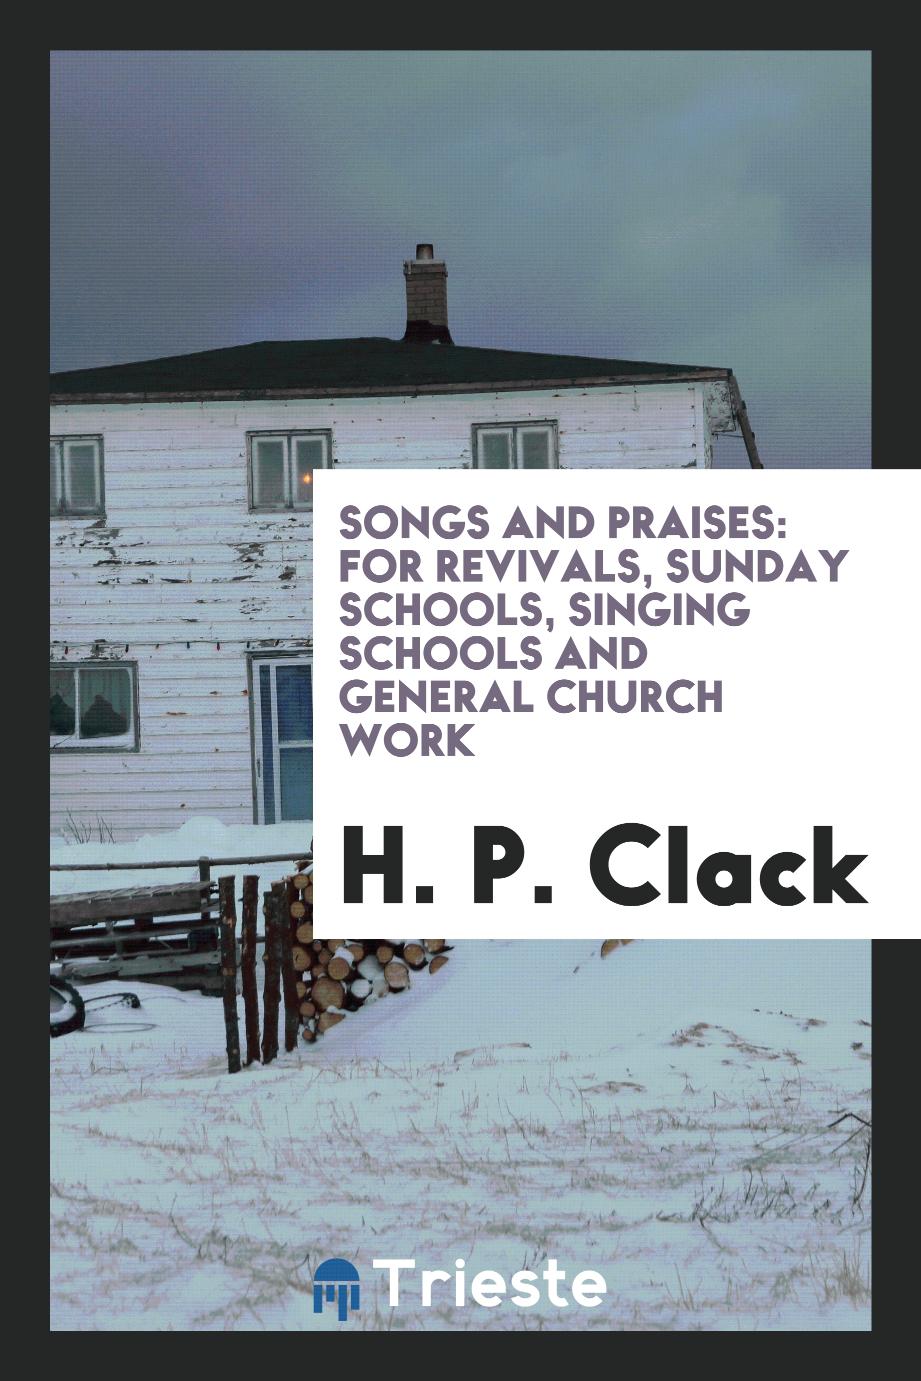 Songs and Praises: For Revivals, Sunday Schools, Singing Schools and General Church Work